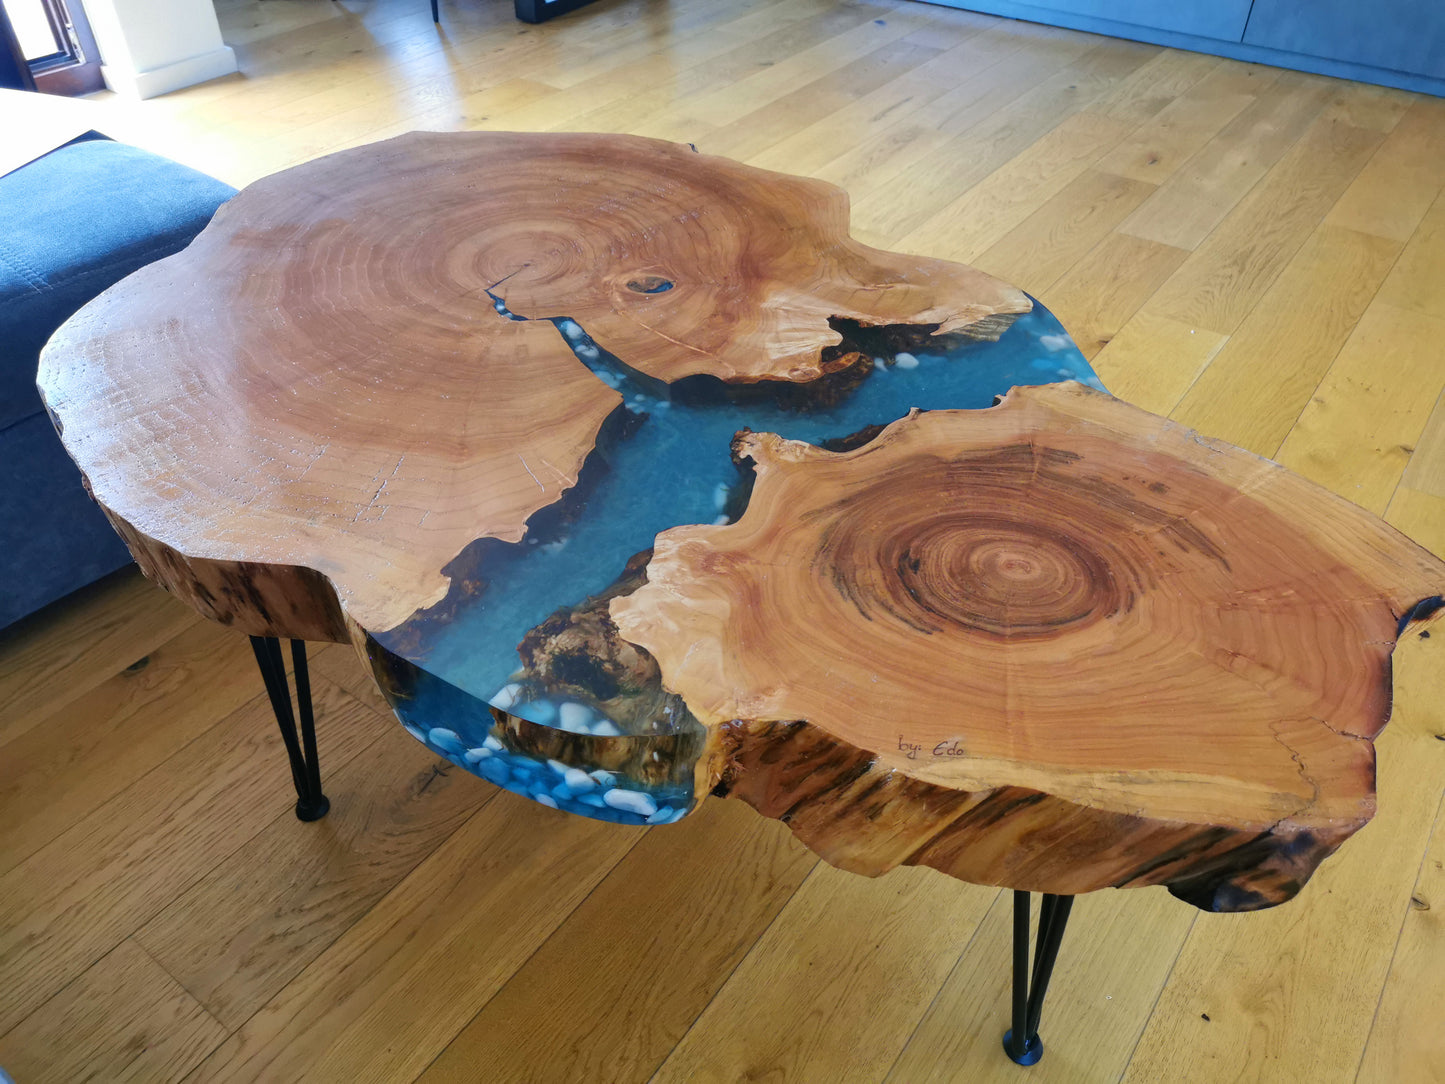 Coffee table made of Maple wood and epoxy resin